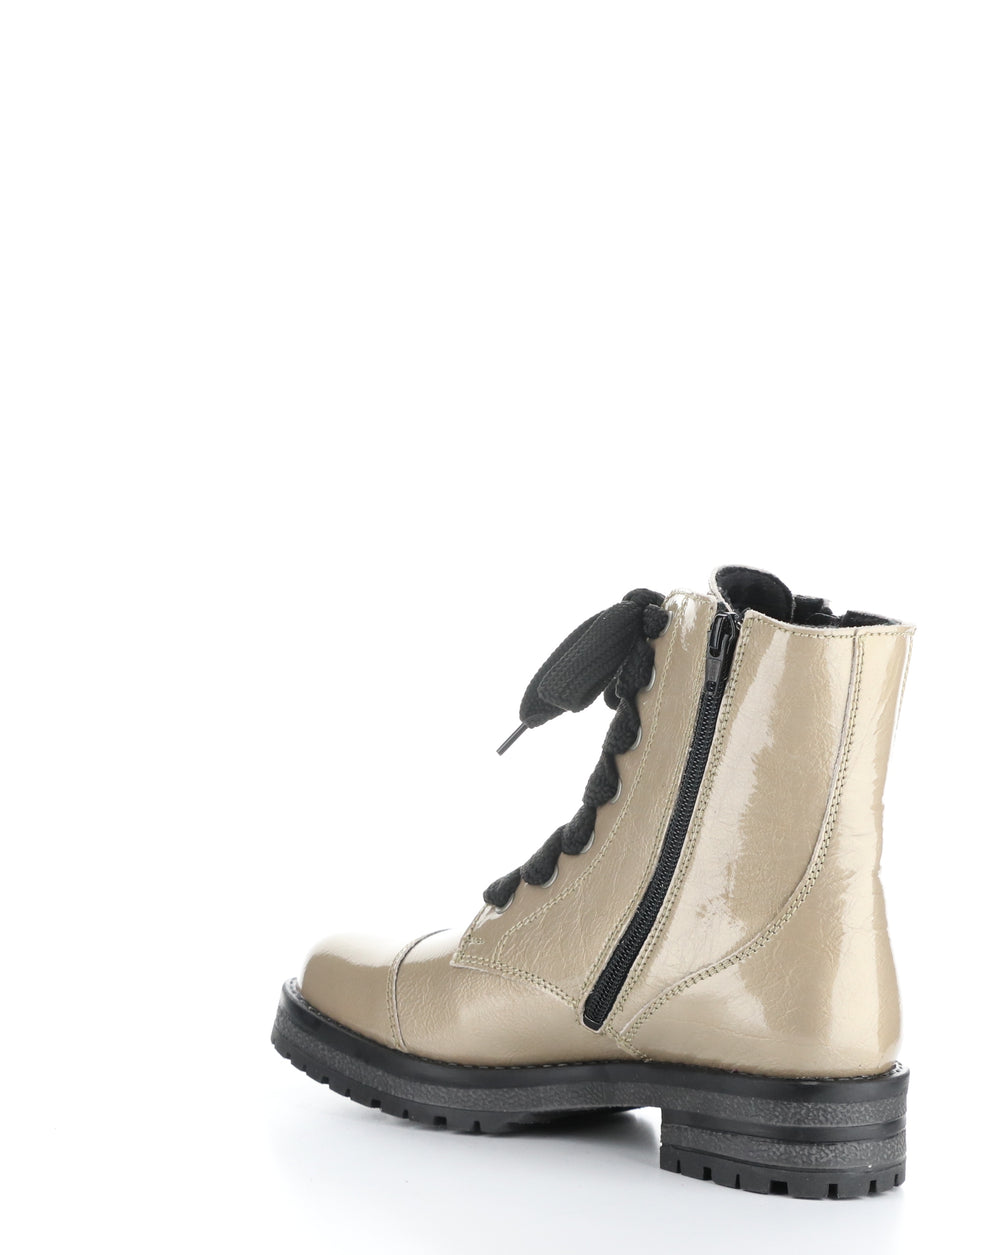 PAULIE TAUPE Round Toe Boots